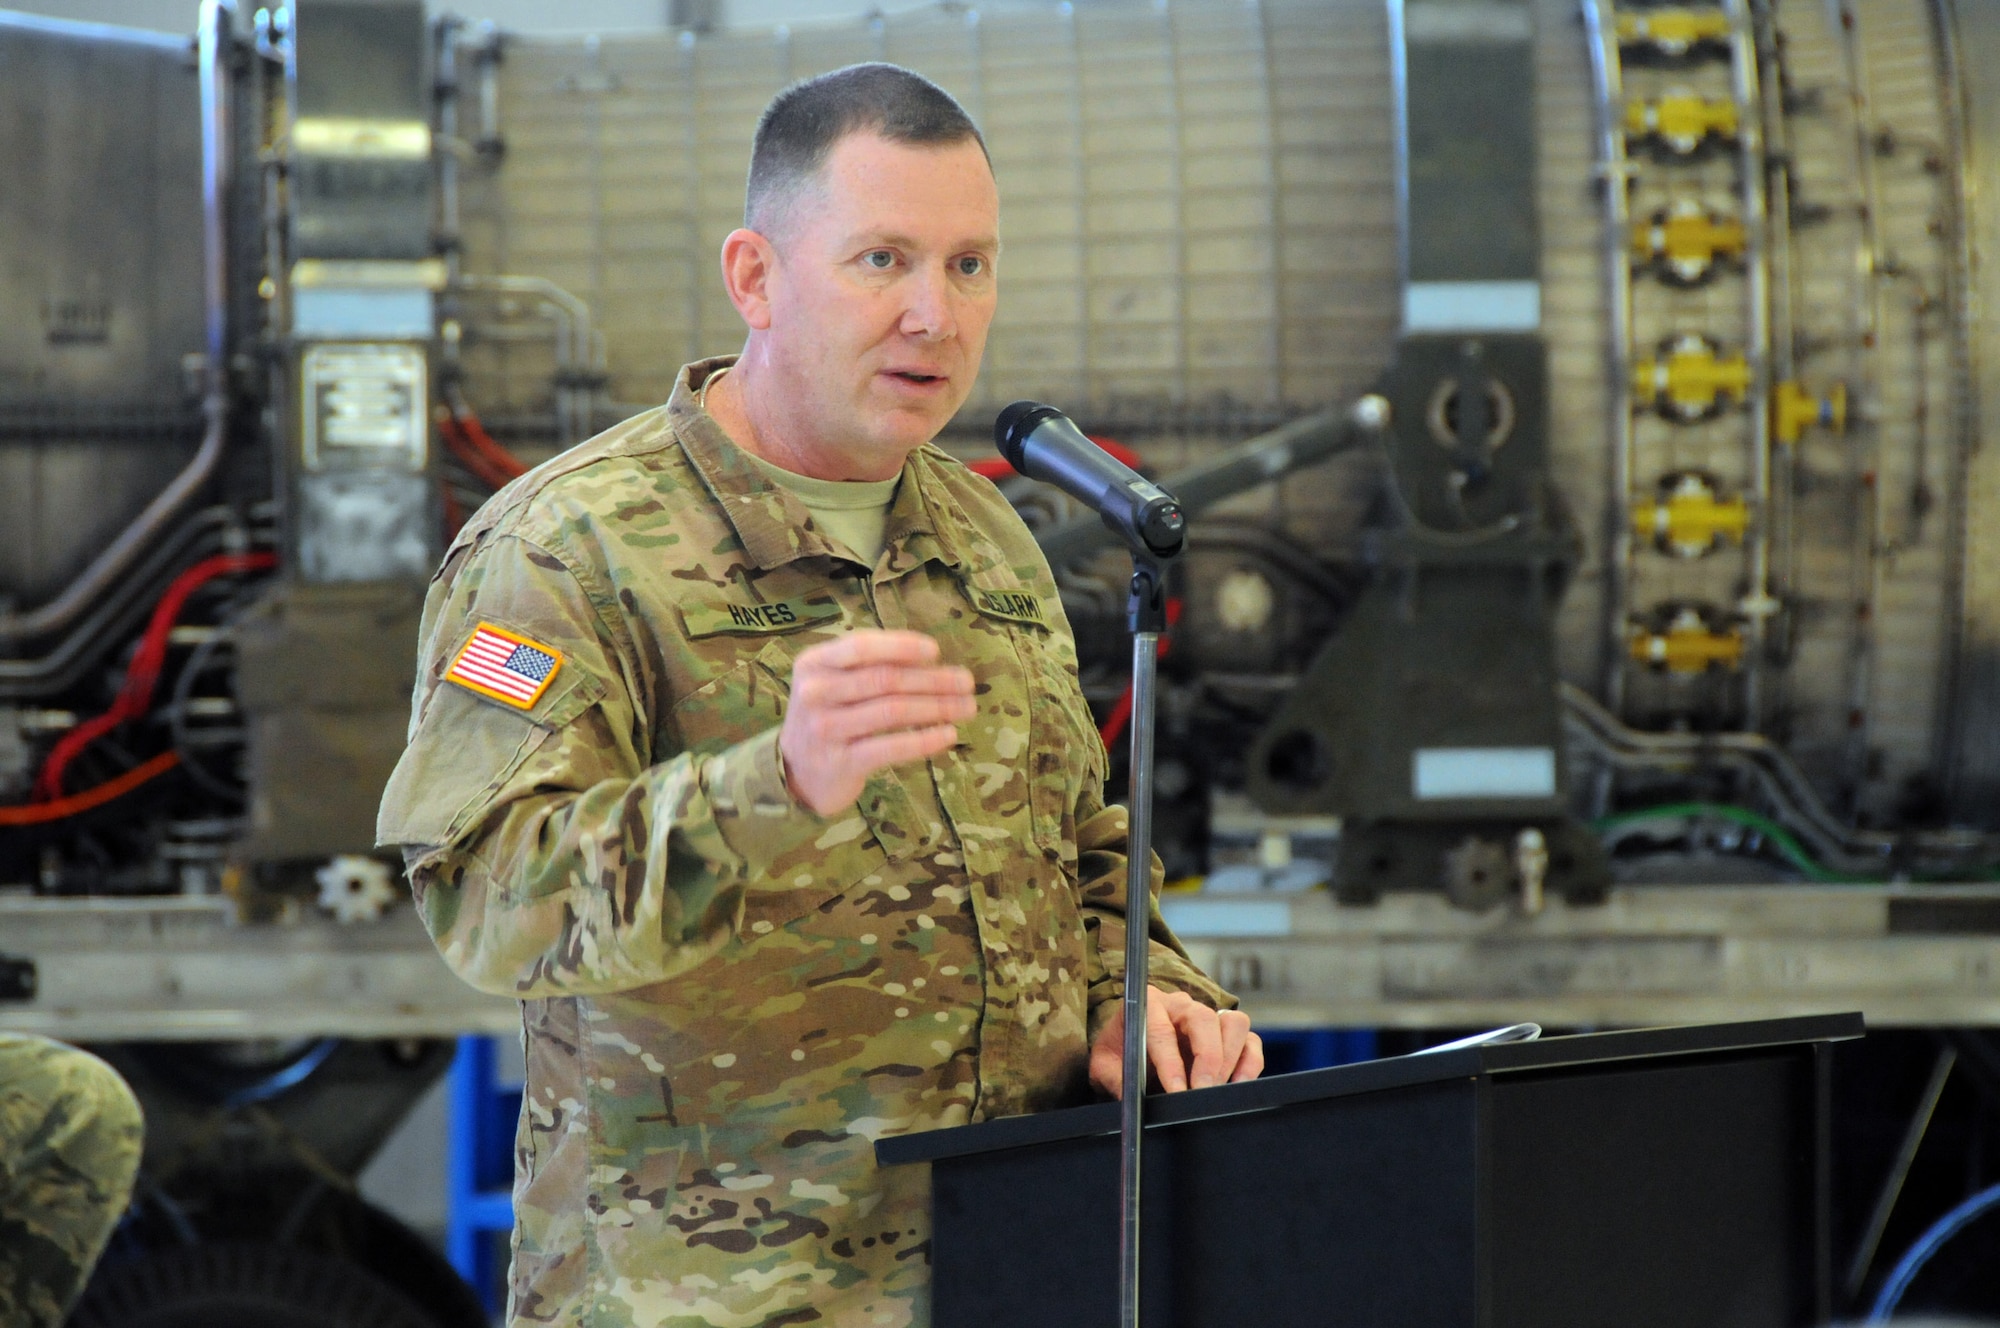 The Adjutant General of Illinois, Maj. Gen. Richard J. Hayes, Jr., addresses the members of the 183rd Air Operations Group during an activation ceremony Jan. 10, 2016 in Springfield, Illinois. The Illinois Air National Guard unit is responsible for command and control missions in combat theaters around the world.  Hayes stands in front of an F16 engine.  The unit also repairs F16 engines and recently began testing A10 engines.  (U.S.  Air National Guard photo by Master Sgt. Shaun Kerr/Released)